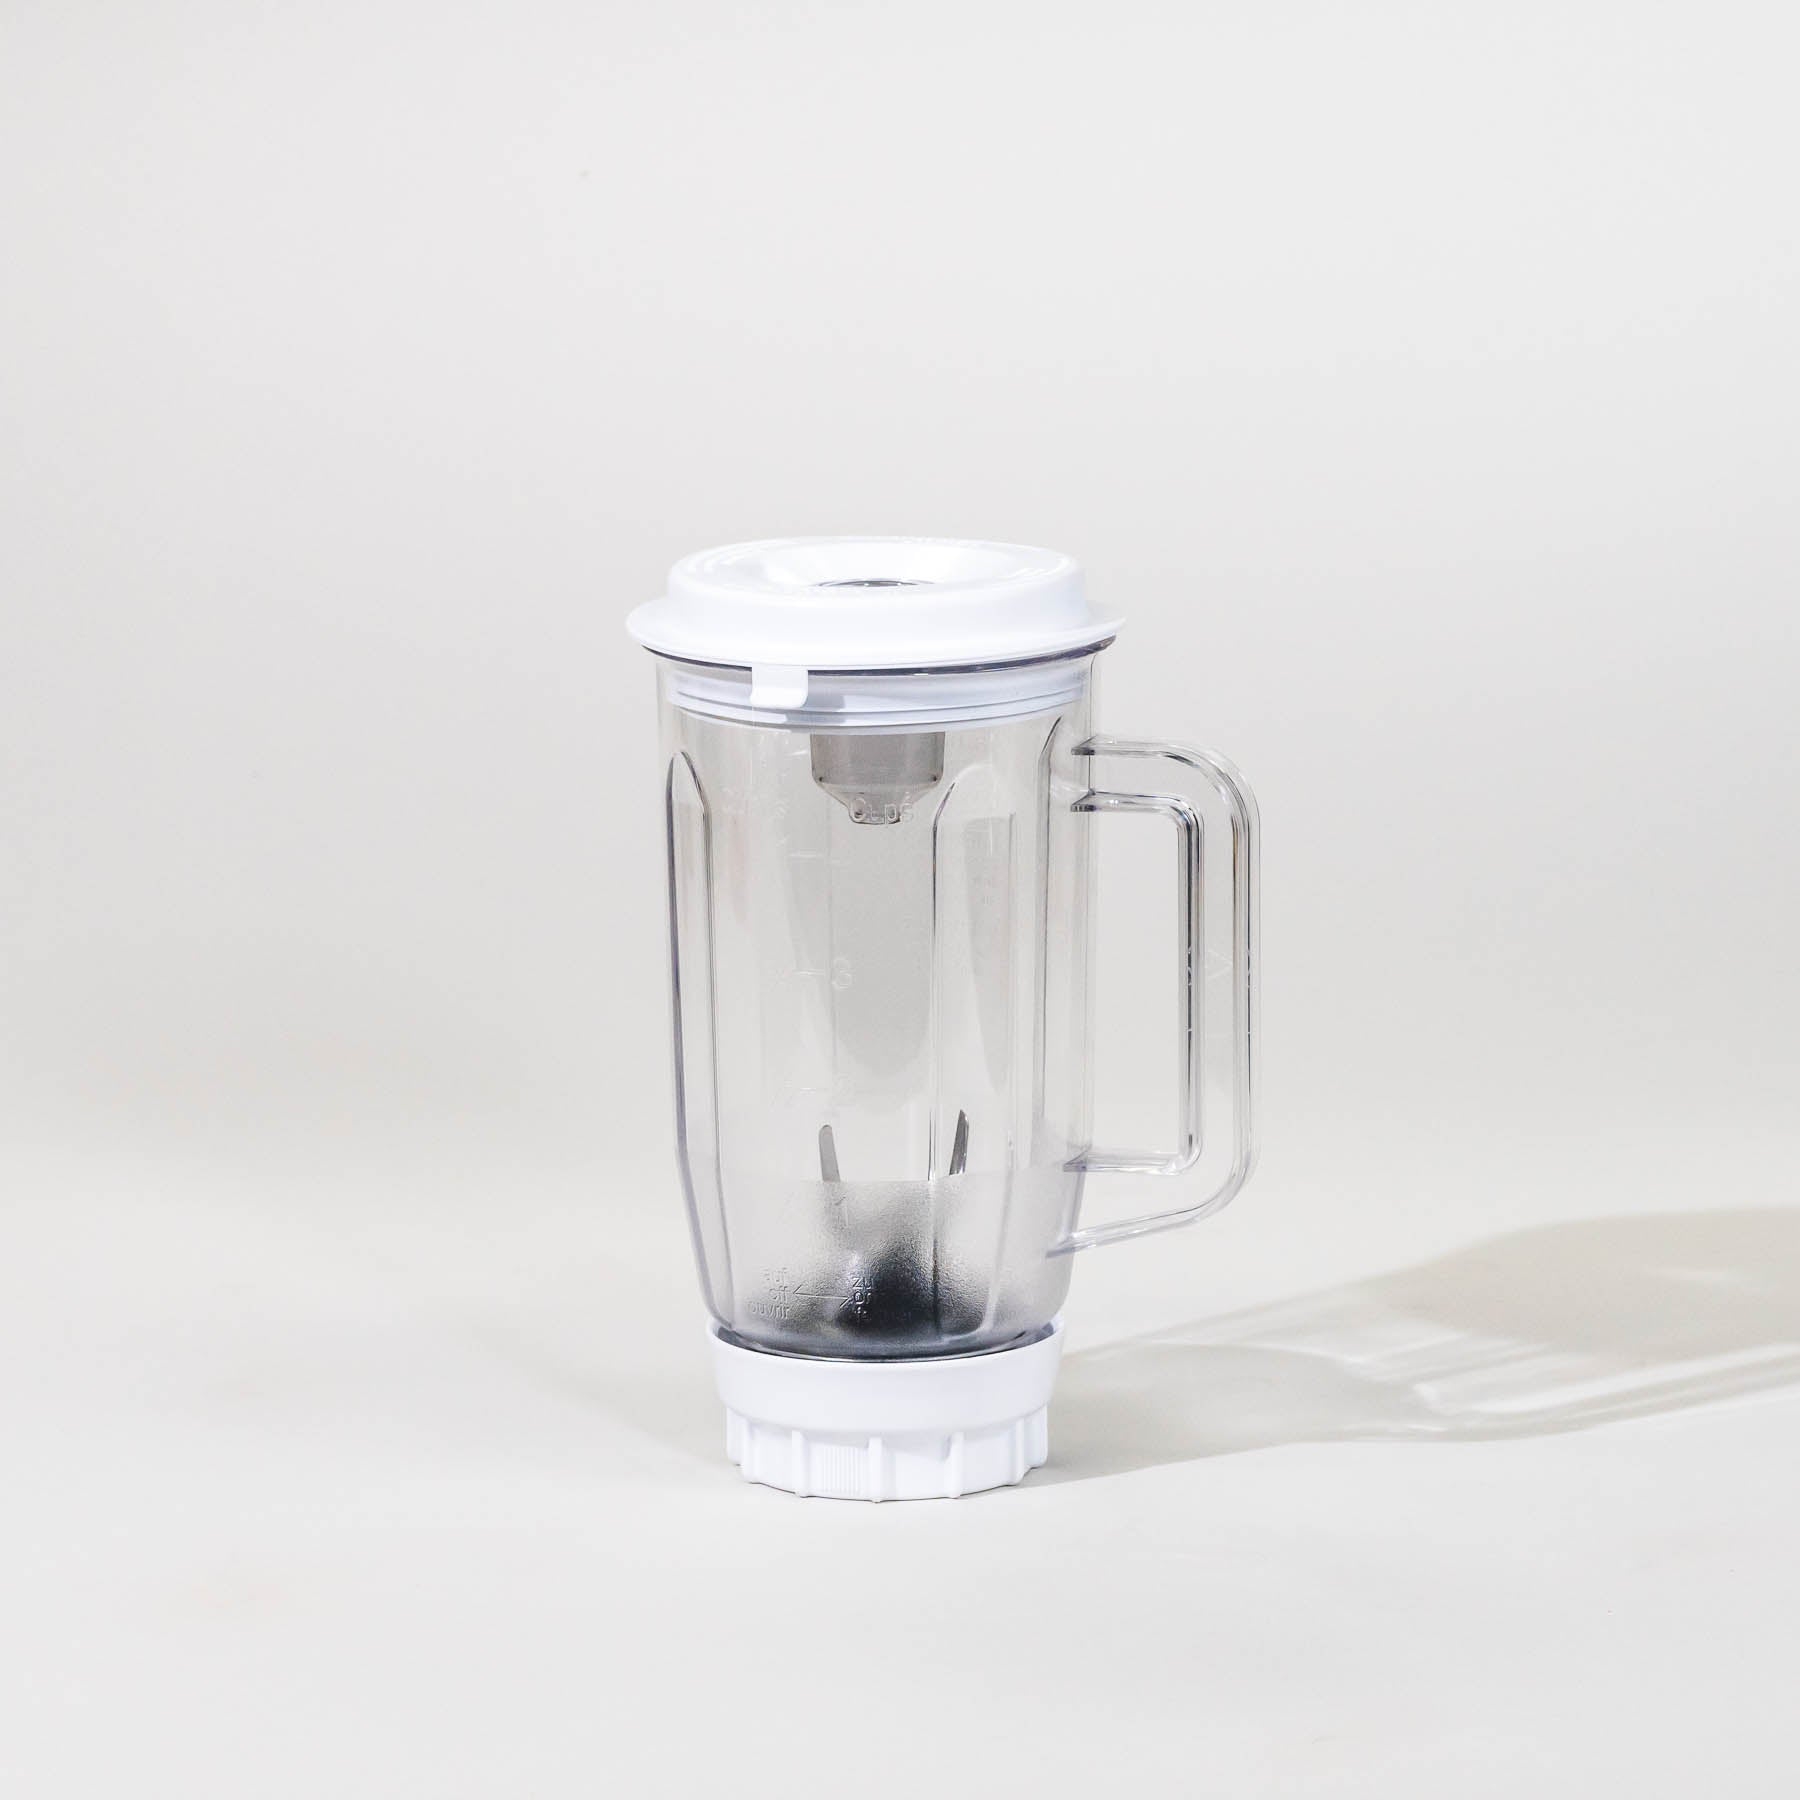 Tahiti give Opdater Refurbished Compact Mixer Blender Attachment